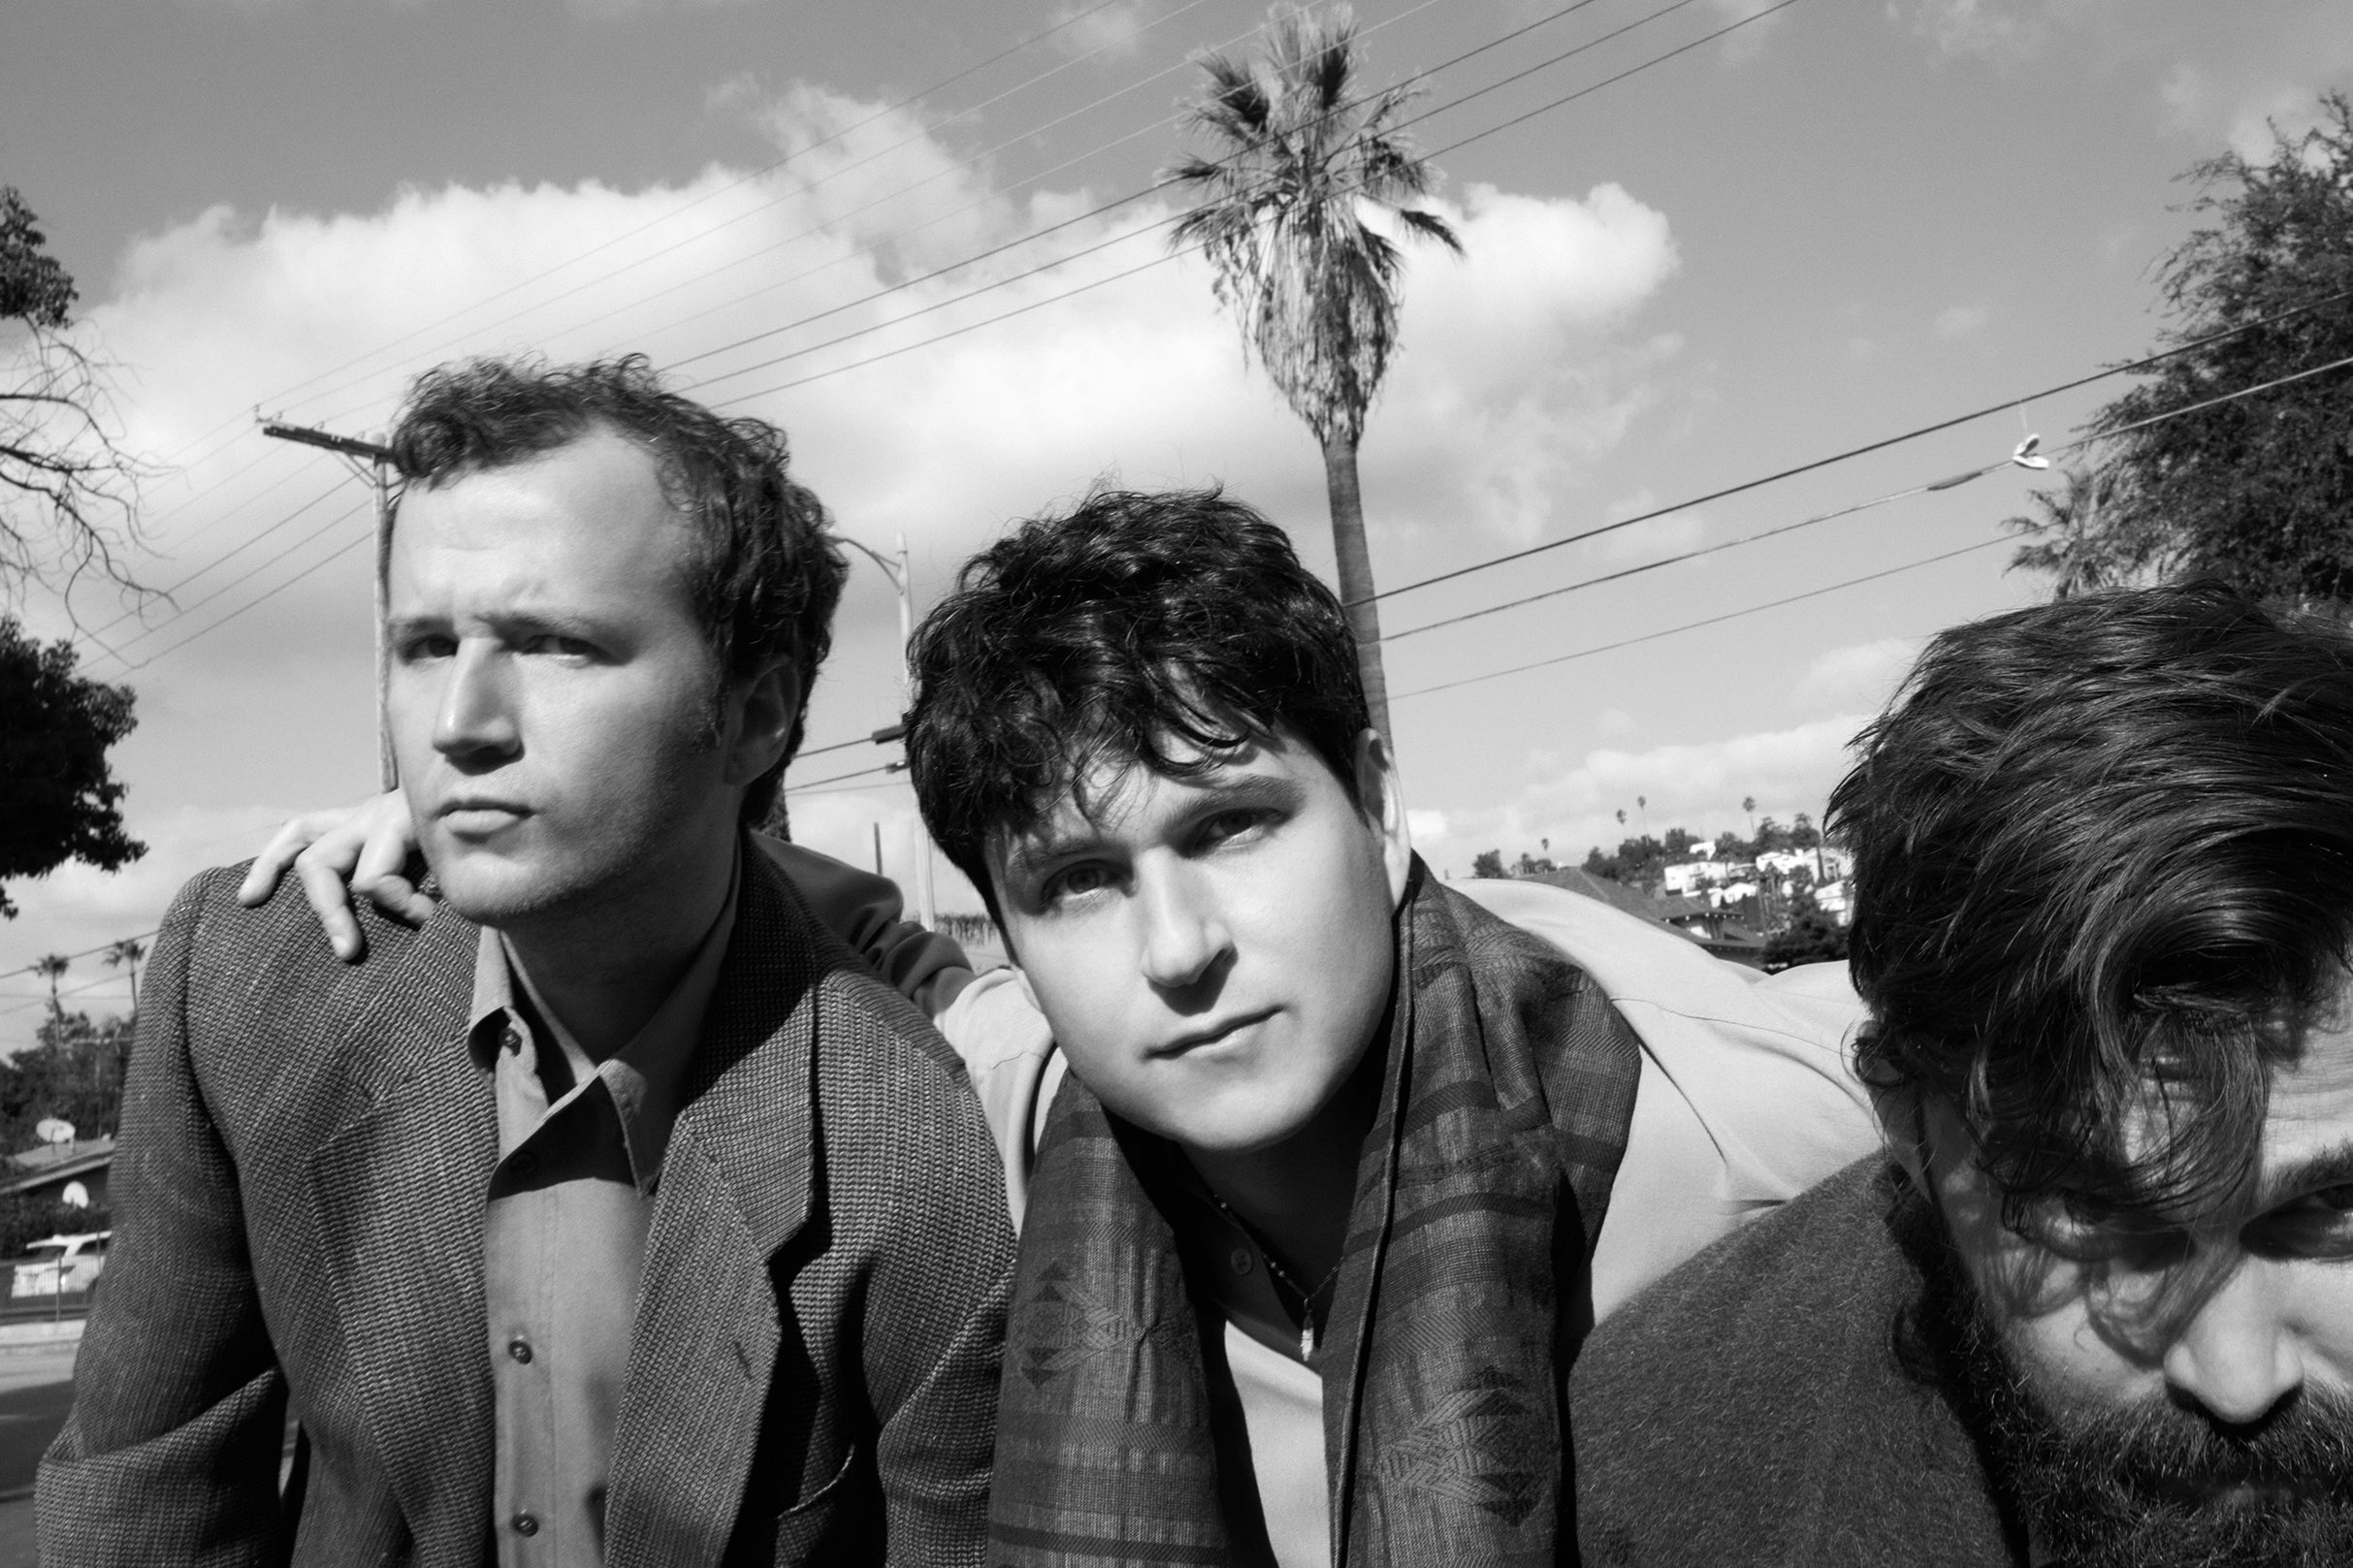 Vampire Weekend - 'Only God Was Above Us' Tour free pre-sale password for early tickets in Washington